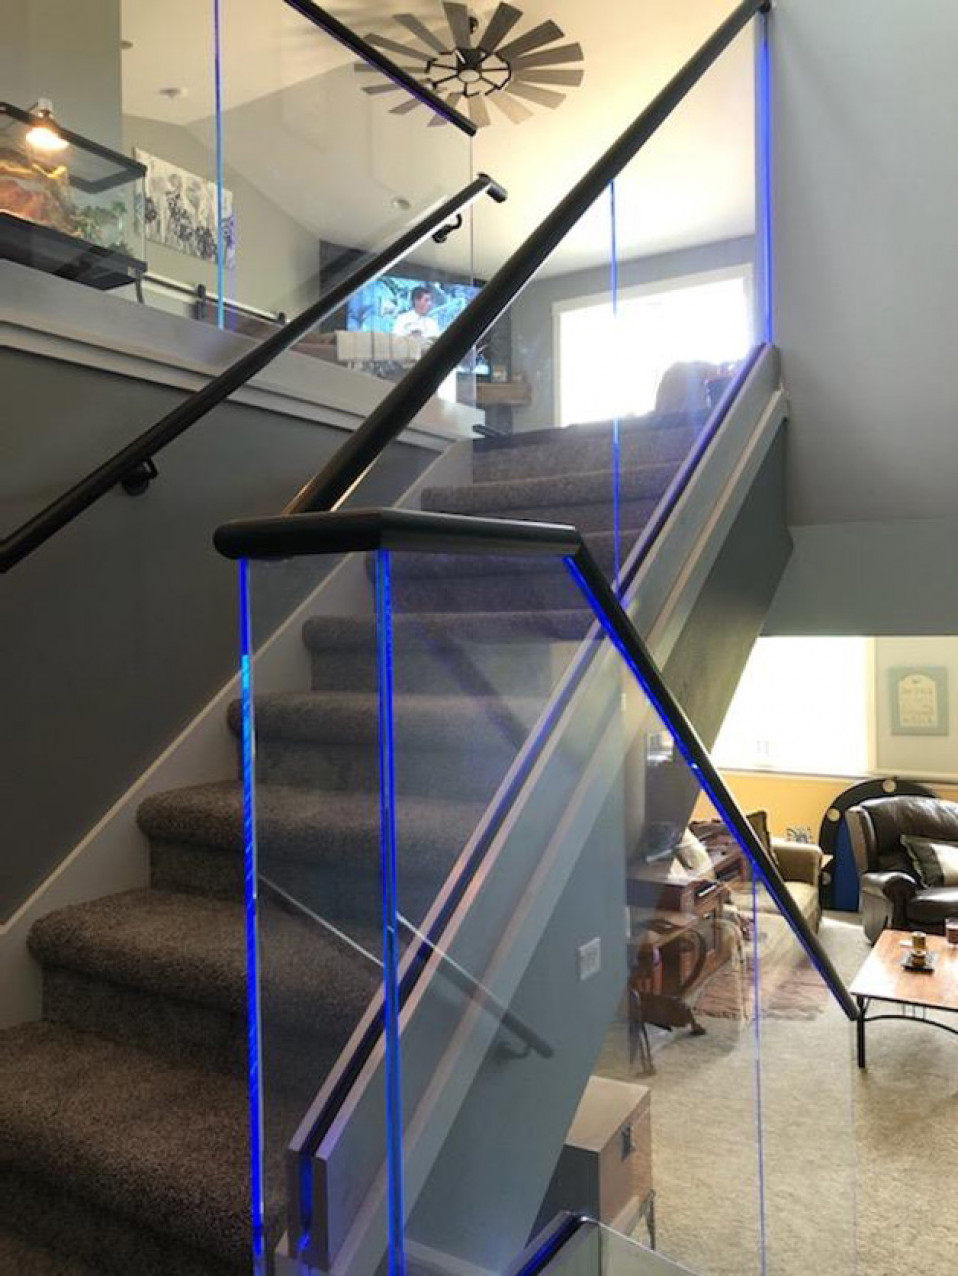 Lighted Handrail & Railing Systems